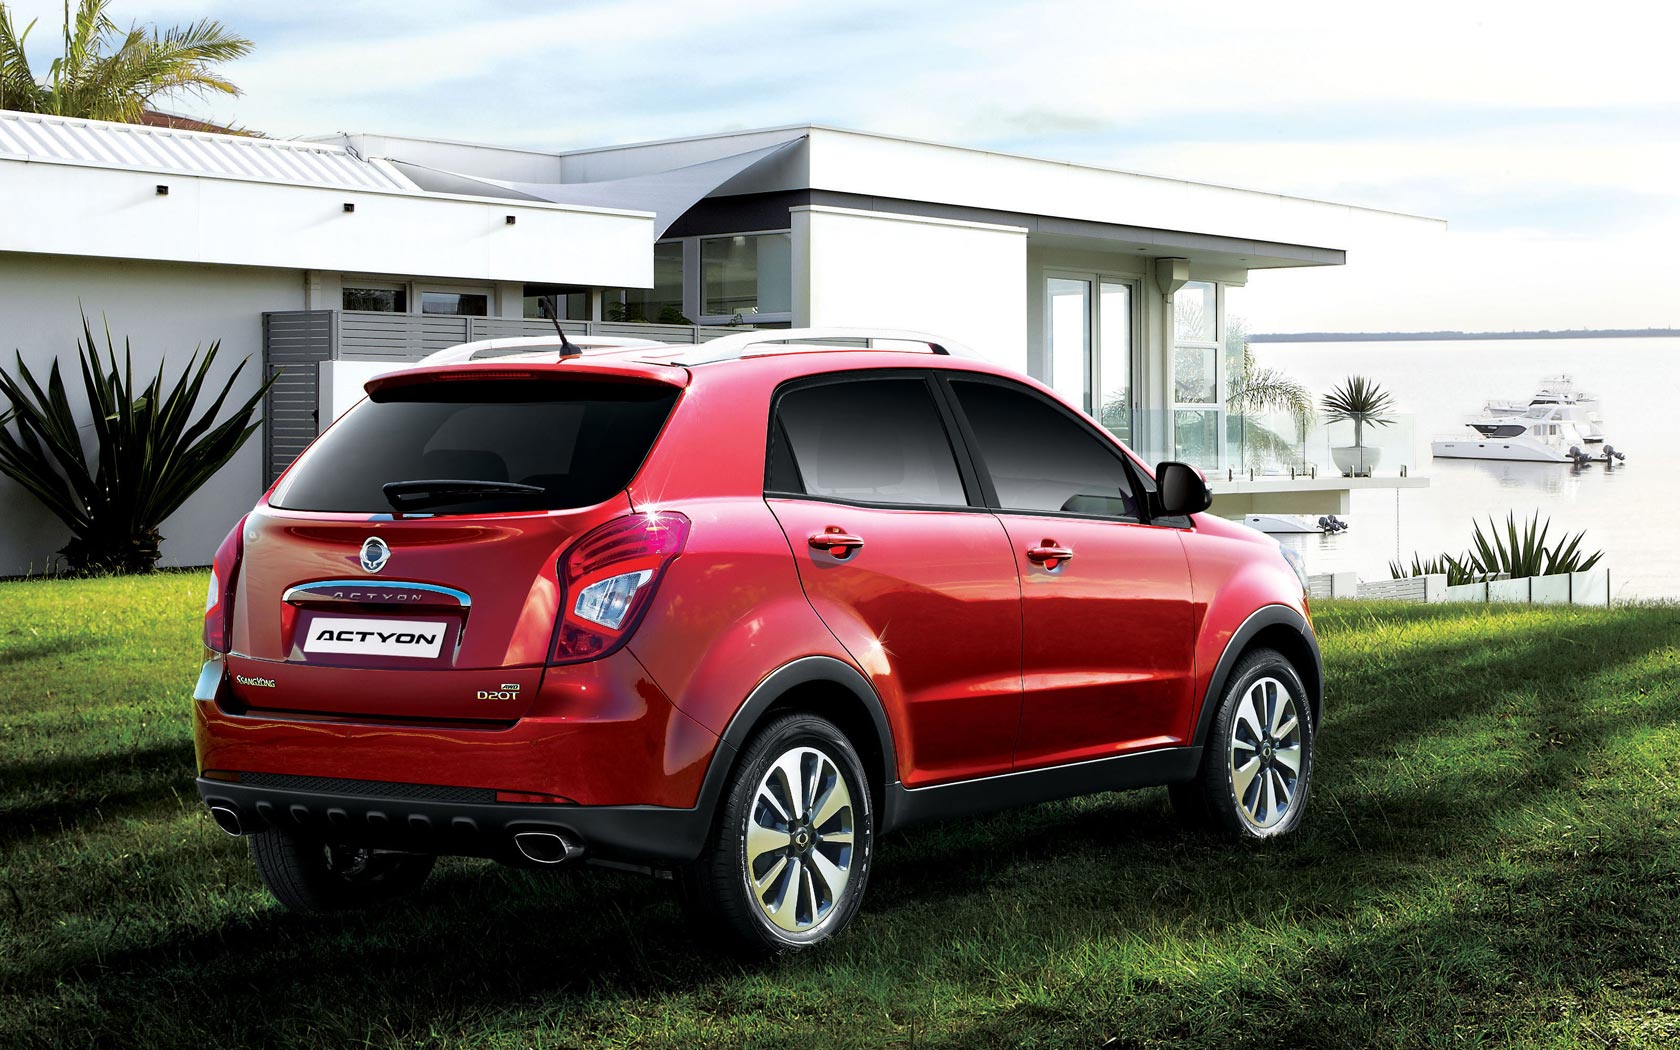 Ssangyong new actyon 2013. SSANGYONG Actyon. SSANGYONG New Actyon. SSANGYONG SSANGYONG Actyon. SSANGYONG Actyon New 2014.